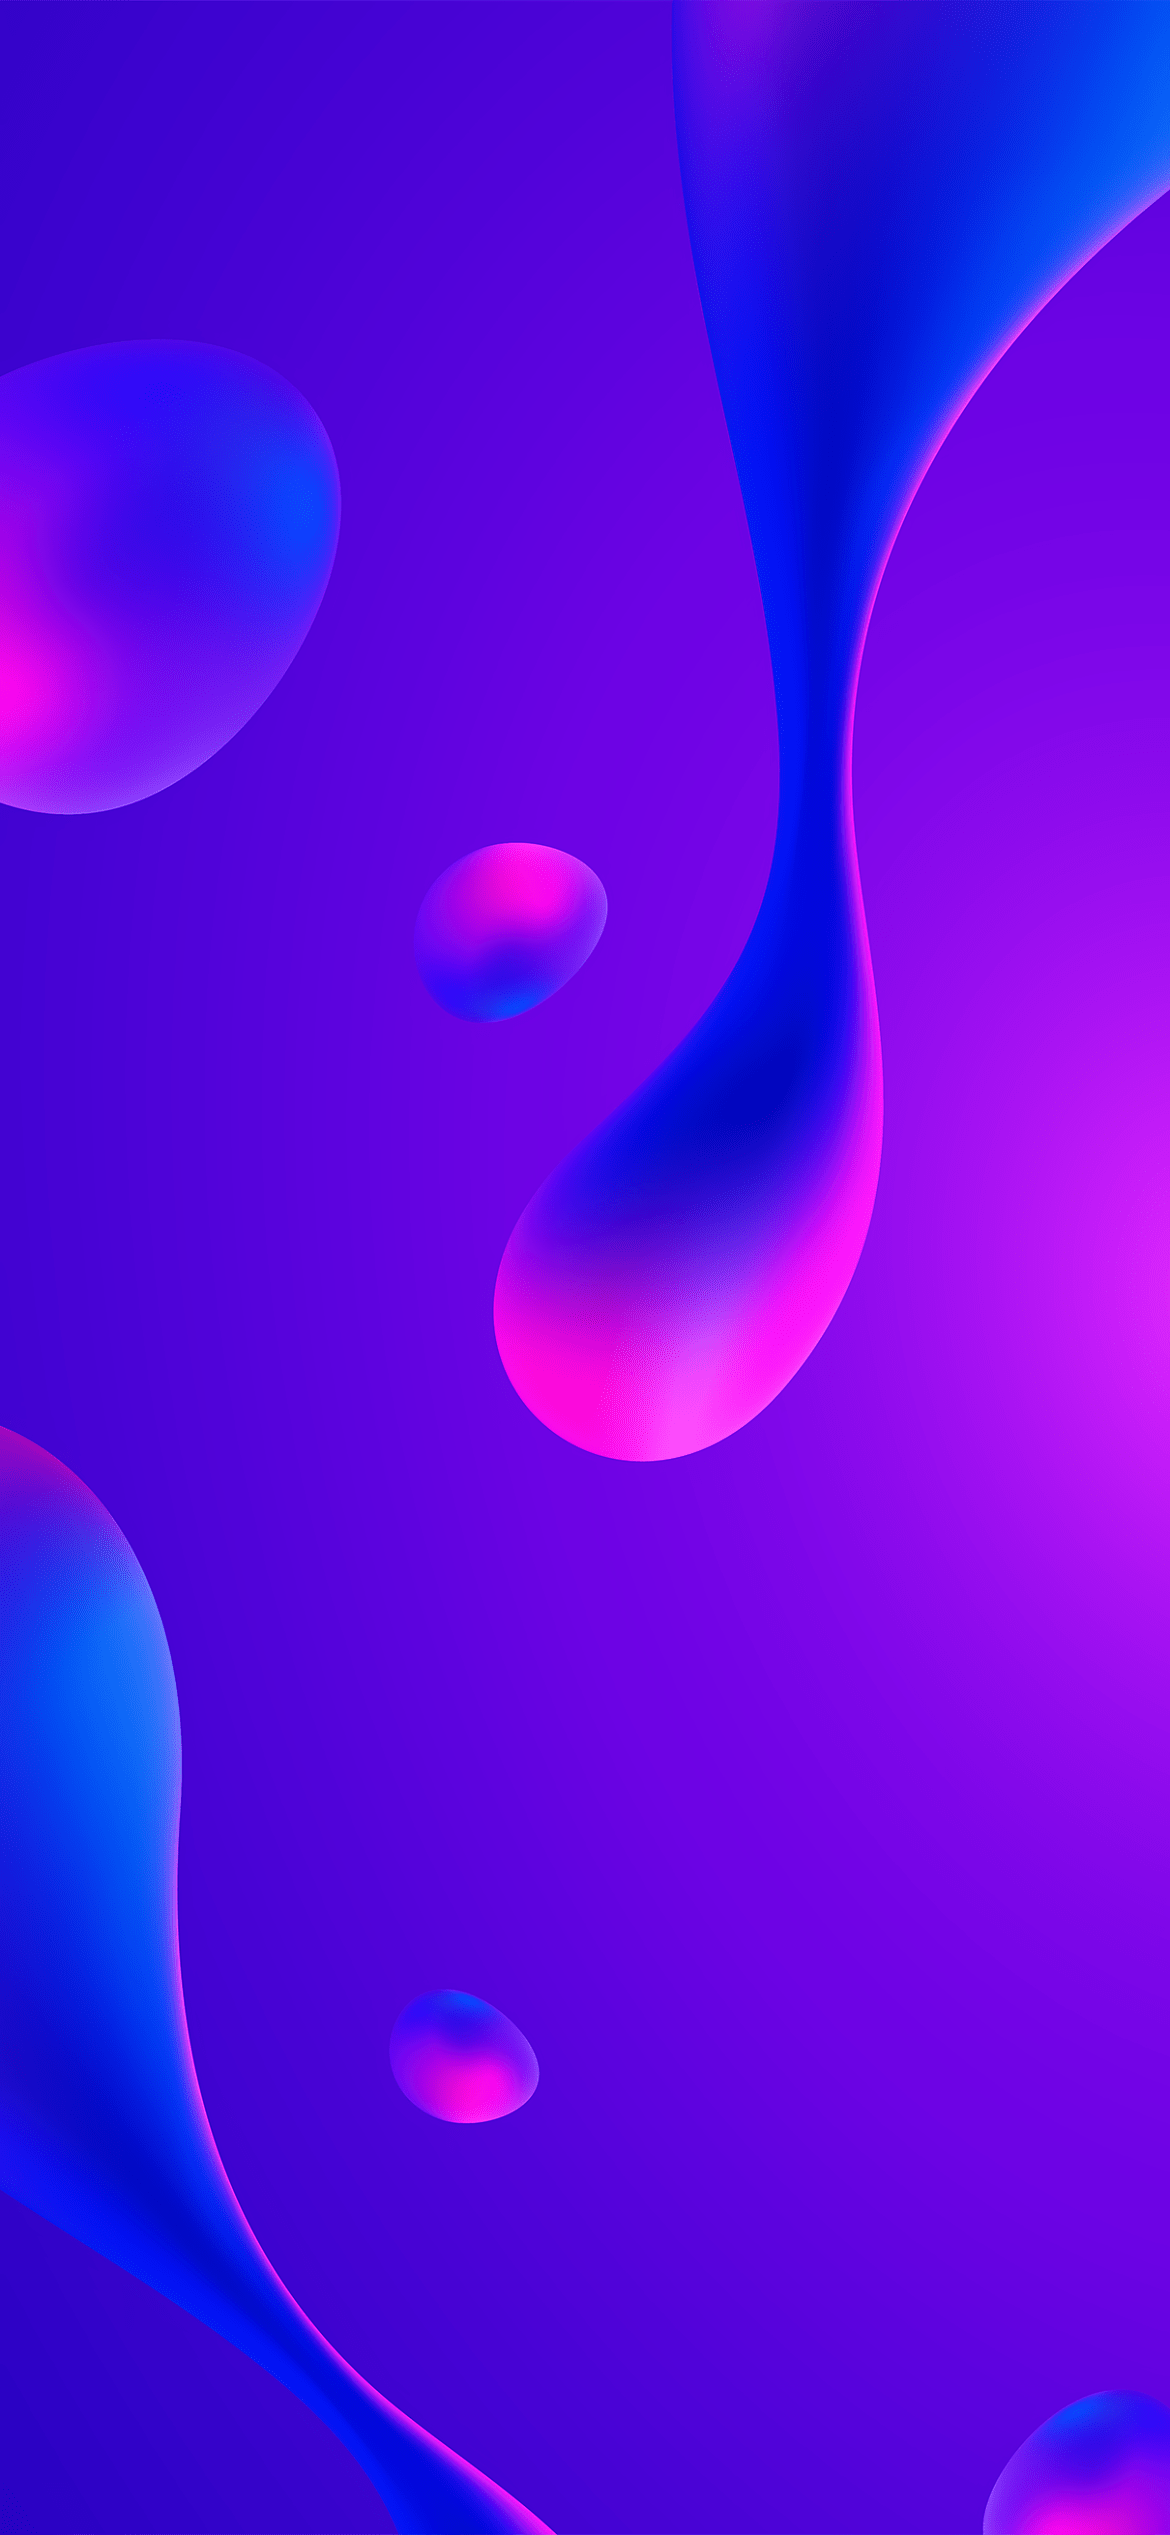 A purple and blue abstract image with flowing shapes - Magenta